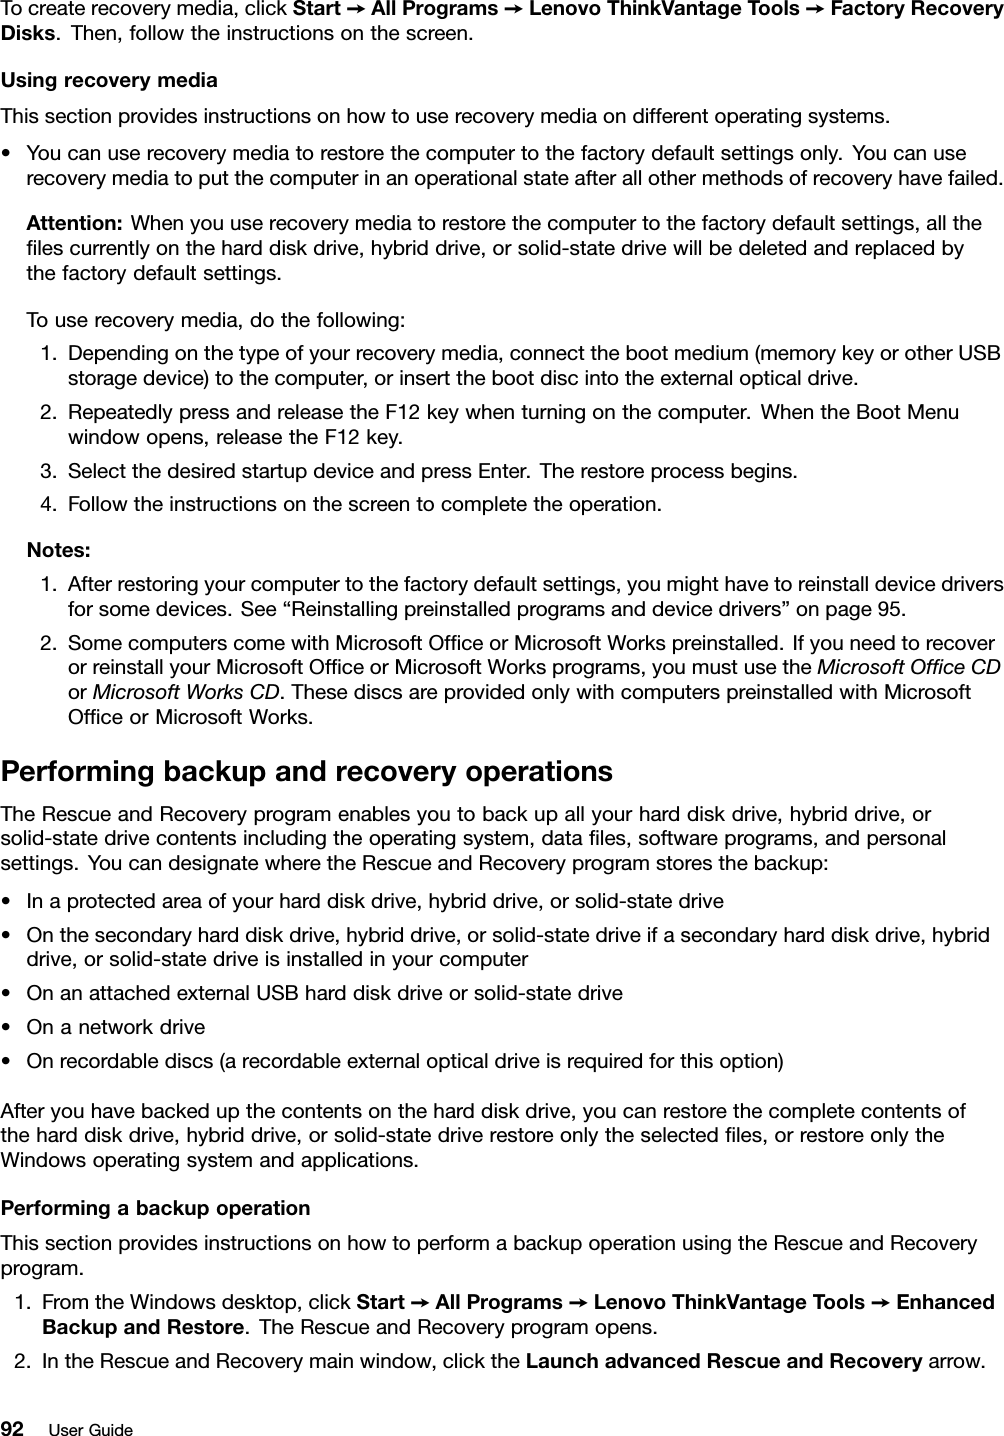 To create recovery media, click Start ➙All Programs ➙Lenovo ThinkVantage Tools ➙Factory RecoveryDisks. Then, follow the instructions on the screen.Using recovery mediaThis section provides instructions on how to use recovery media on different operating systems.• You can use recovery media to restore the computer to the factory default settings only. You can userecovery media to put the computer in an operational state after all other methods of recovery have failed.Attention: When you use recovery media to restore the computer to the factory default settings, all theﬁles currently on the hard disk drive, hybrid drive, or solid-state drive will be deleted and replaced bythe factory default settings.To use recovery media, do the following:1. Depending on the type of your recovery media, connect the boot medium (memory key or other USBstorage device) to the computer, or insert the boot disc into the external optical drive.2. Repeatedly press and release the F12 key when turning on the computer. When the Boot Menuwindow opens, release the F12 key.3. Select the desired startup device and press Enter. The restore process begins.4. Follow the instructions on the screen to complete the operation.Notes:1. After restoring your computer to the factory default settings, you might have to reinstall device driversfor some devices. See “Reinstalling preinstalled programs and device drivers” on page 95.2. Some computers come with Microsoft Ofﬁce or Microsoft Works preinstalled. If you need to recoveror reinstall your Microsoft Ofﬁce or Microsoft Works programs, you must use the Microsoft Ofﬁce CDor Microsoft Works CD. These discs are provided only with computers preinstalled with MicrosoftOfﬁce or Microsoft Works.Performing backup and recovery operationsThe Rescue and Recovery program enables you to back up all your hard disk drive, hybrid drive, orsolid-state drive contents including the operating system, data ﬁles, software programs, and personalsettings. You can designate where the Rescue and Recovery program stores the backup:• In a protected area of your hard disk drive, hybrid drive, or solid-state drive• On the secondary hard disk drive, hybrid drive, or solid-state drive if a secondary hard disk drive, hybriddrive, or solid-state drive is installed in your computer• On an attached external USB hard disk drive or solid-state drive• On a network drive• On recordable discs (a recordable external optical drive is required for this option)After you have backed up the contents on the hard disk drive, you can restore the complete contents ofthe hard disk drive, hybrid drive, or solid-state drive restore only the selected ﬁles, or restore only theWindows operating system and applications.Performing a backup operationThis section provides instructions on how to perform a backup operation using the Rescue and Recoveryprogram.1. From the Windows desktop, click Start ➙All Programs ➙Lenovo ThinkVantage Tools ➙EnhancedBackup and Restore. The Rescue and Recovery program opens.2. In the Rescue and Recovery main window, click the Launch advanced Rescue and Recovery arrow.92 User Guide